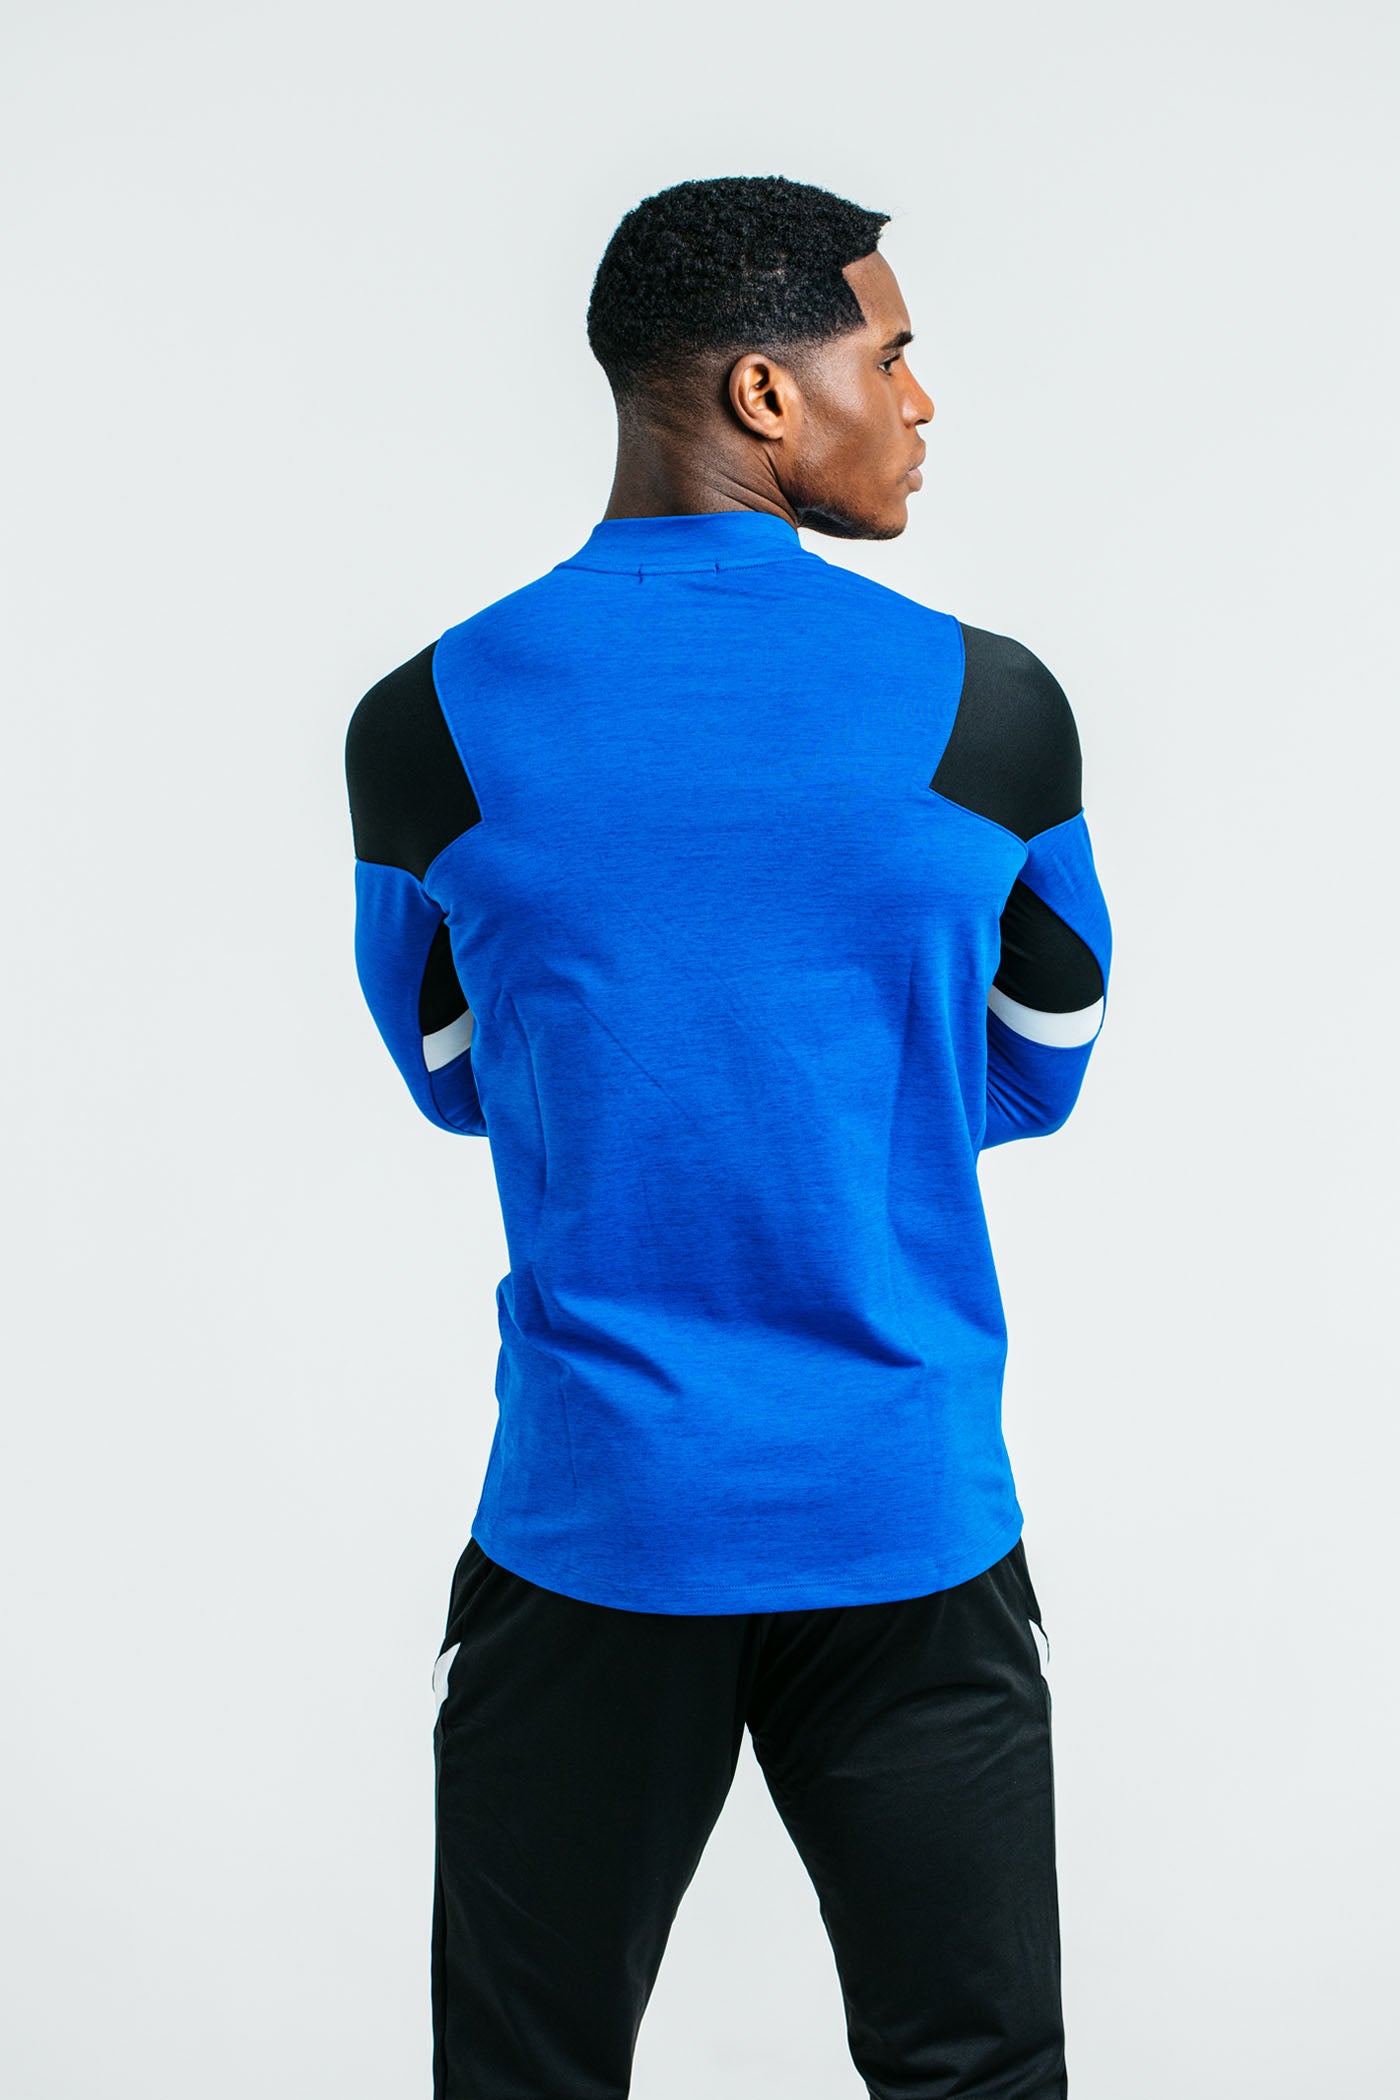 Elite Performance Top In Blue - Gain The Edge Official